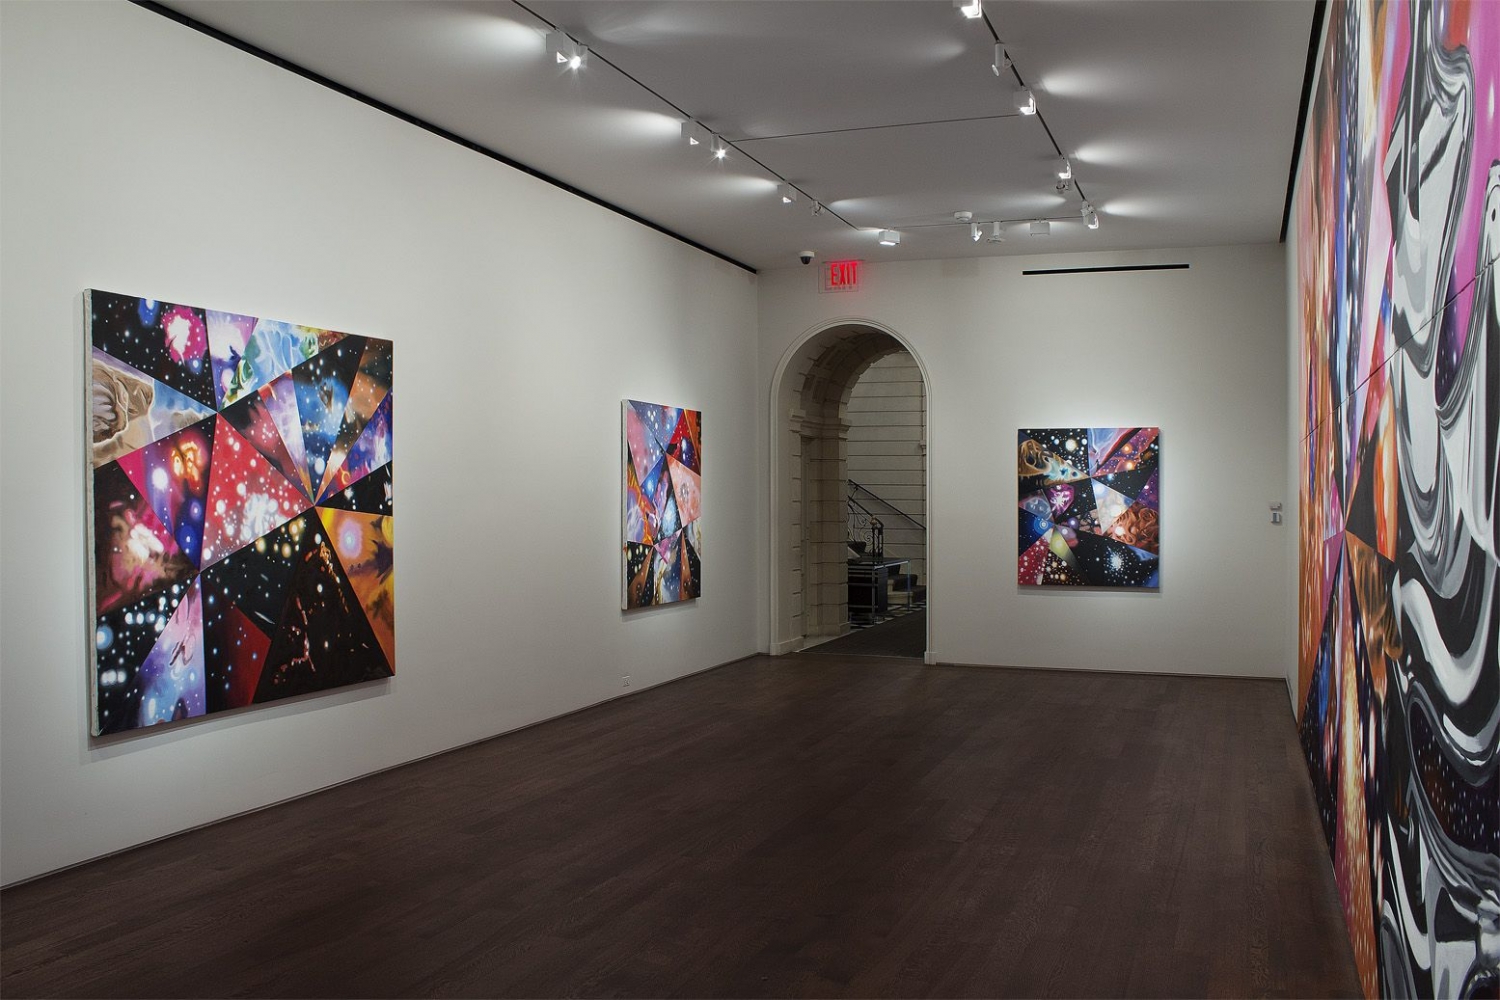 Installation view of James Rosenquist,&nbsp;Multiverse You Are, I Am, September 10&ndash;October 13, 2012., Art&nbsp;&copy; Estate of James Rosenquist&nbsp;/ Licensed by VAGA at ARS, New York.